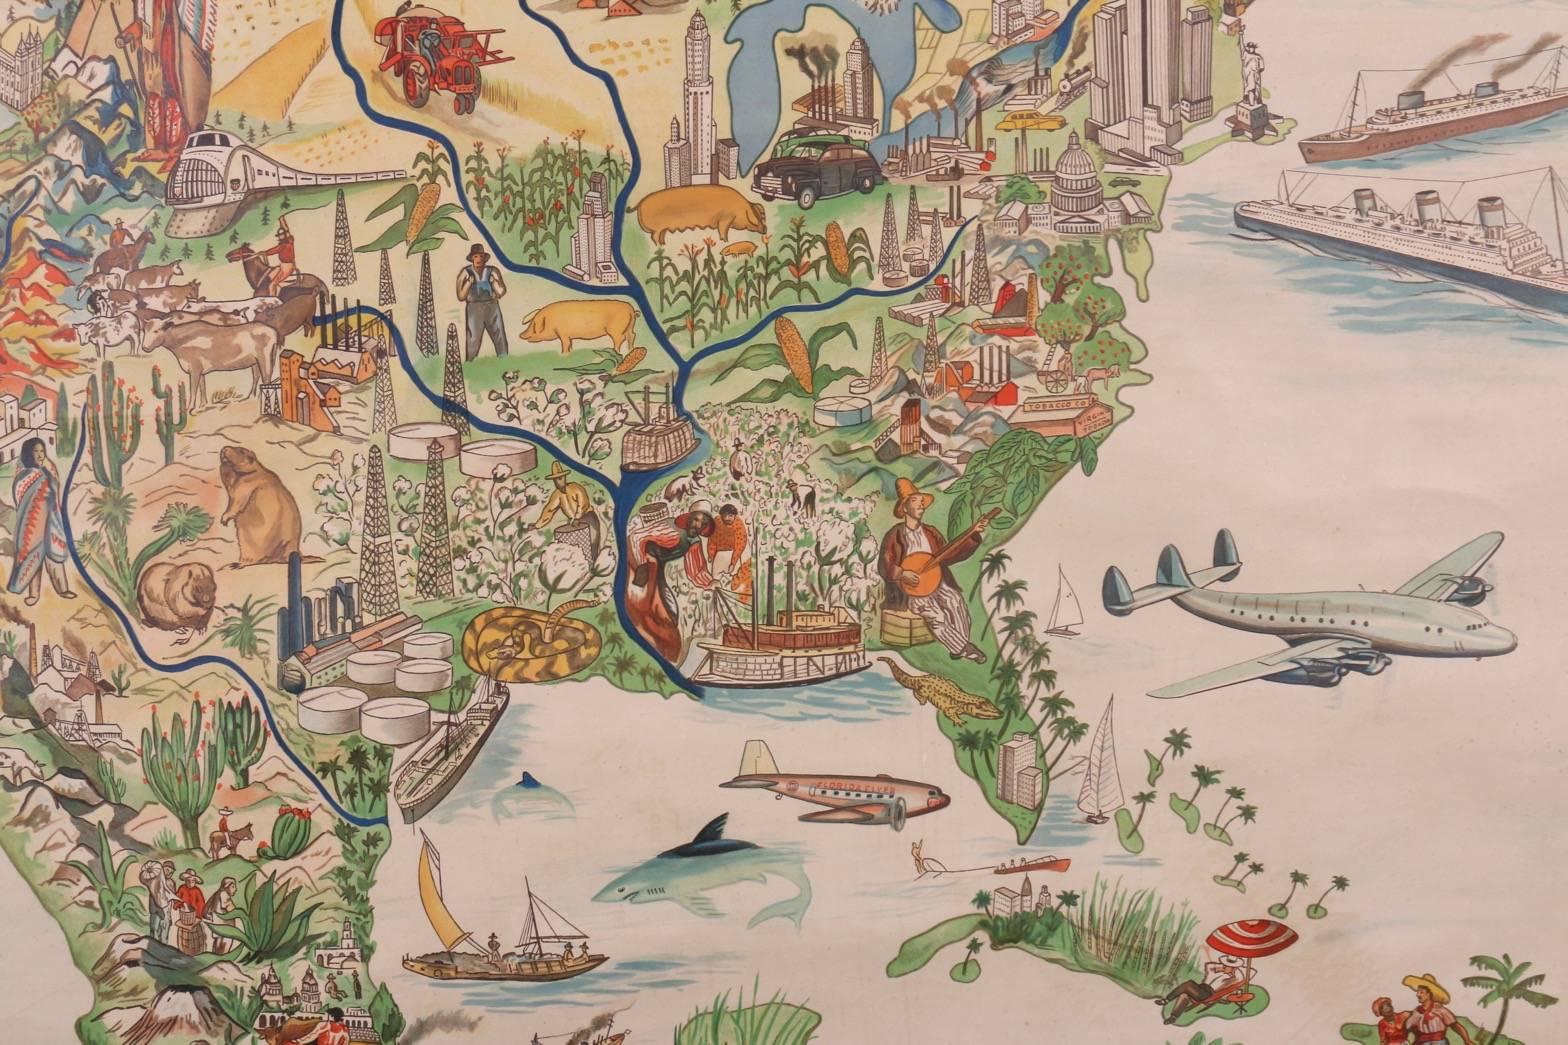 Canvas Large Pictorial Map of North America by Palmer & Associates, Los Angeles